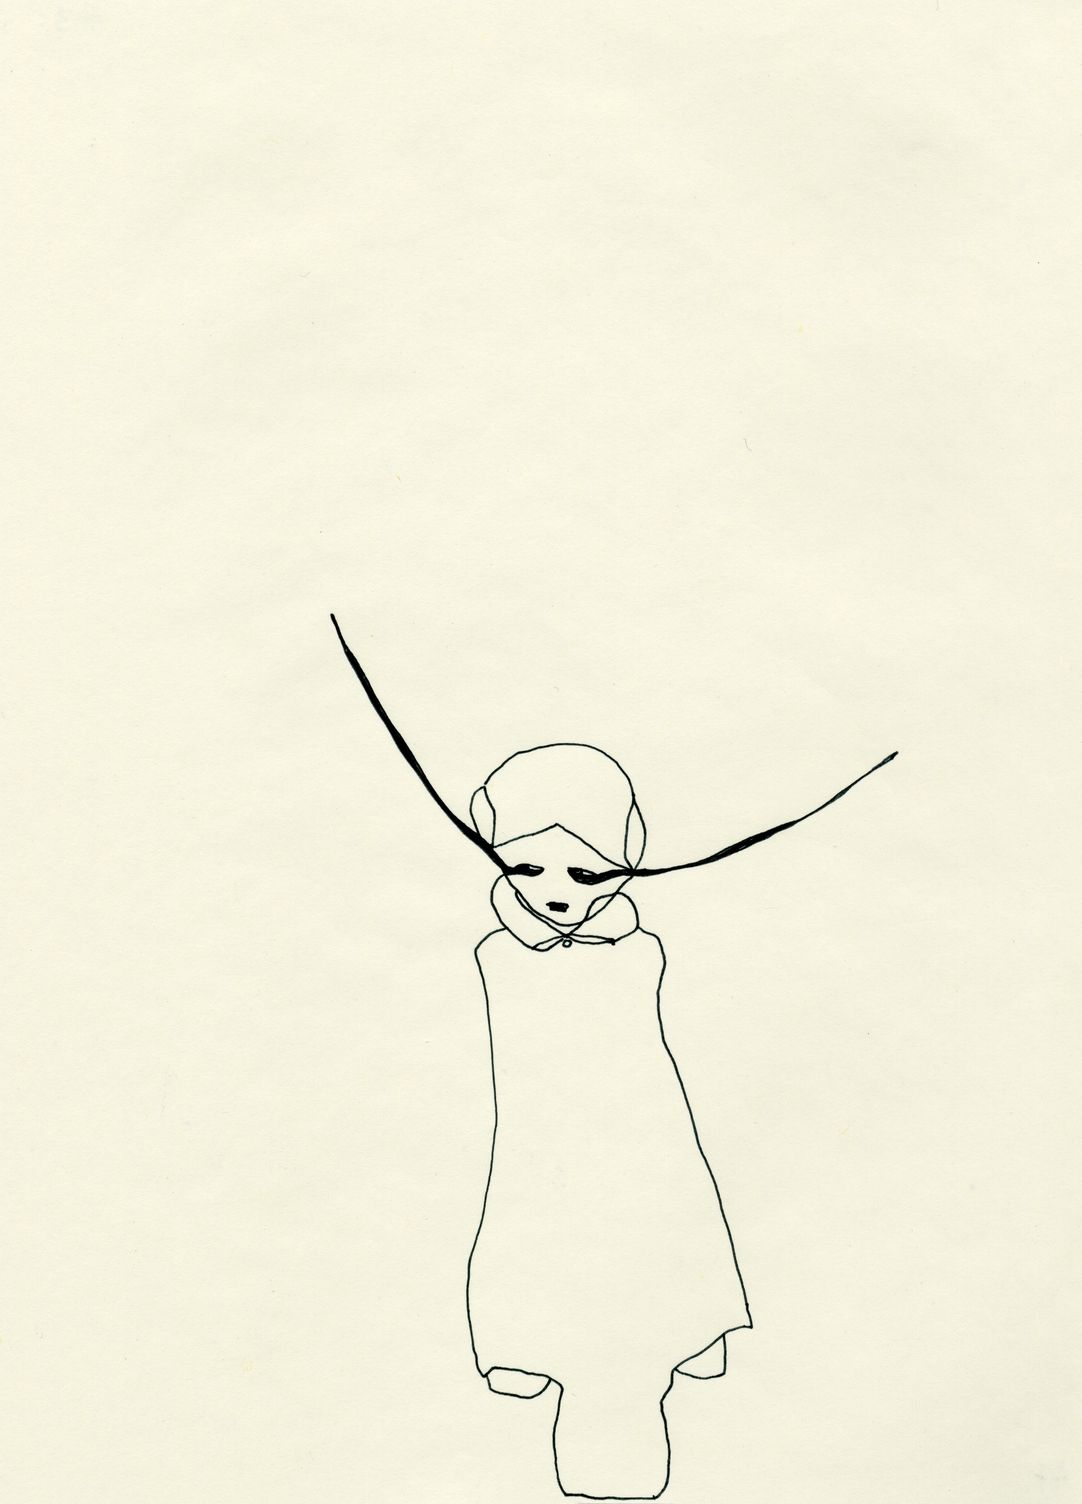 Eyeliner (2008), Work on Paper by Claudia Hill